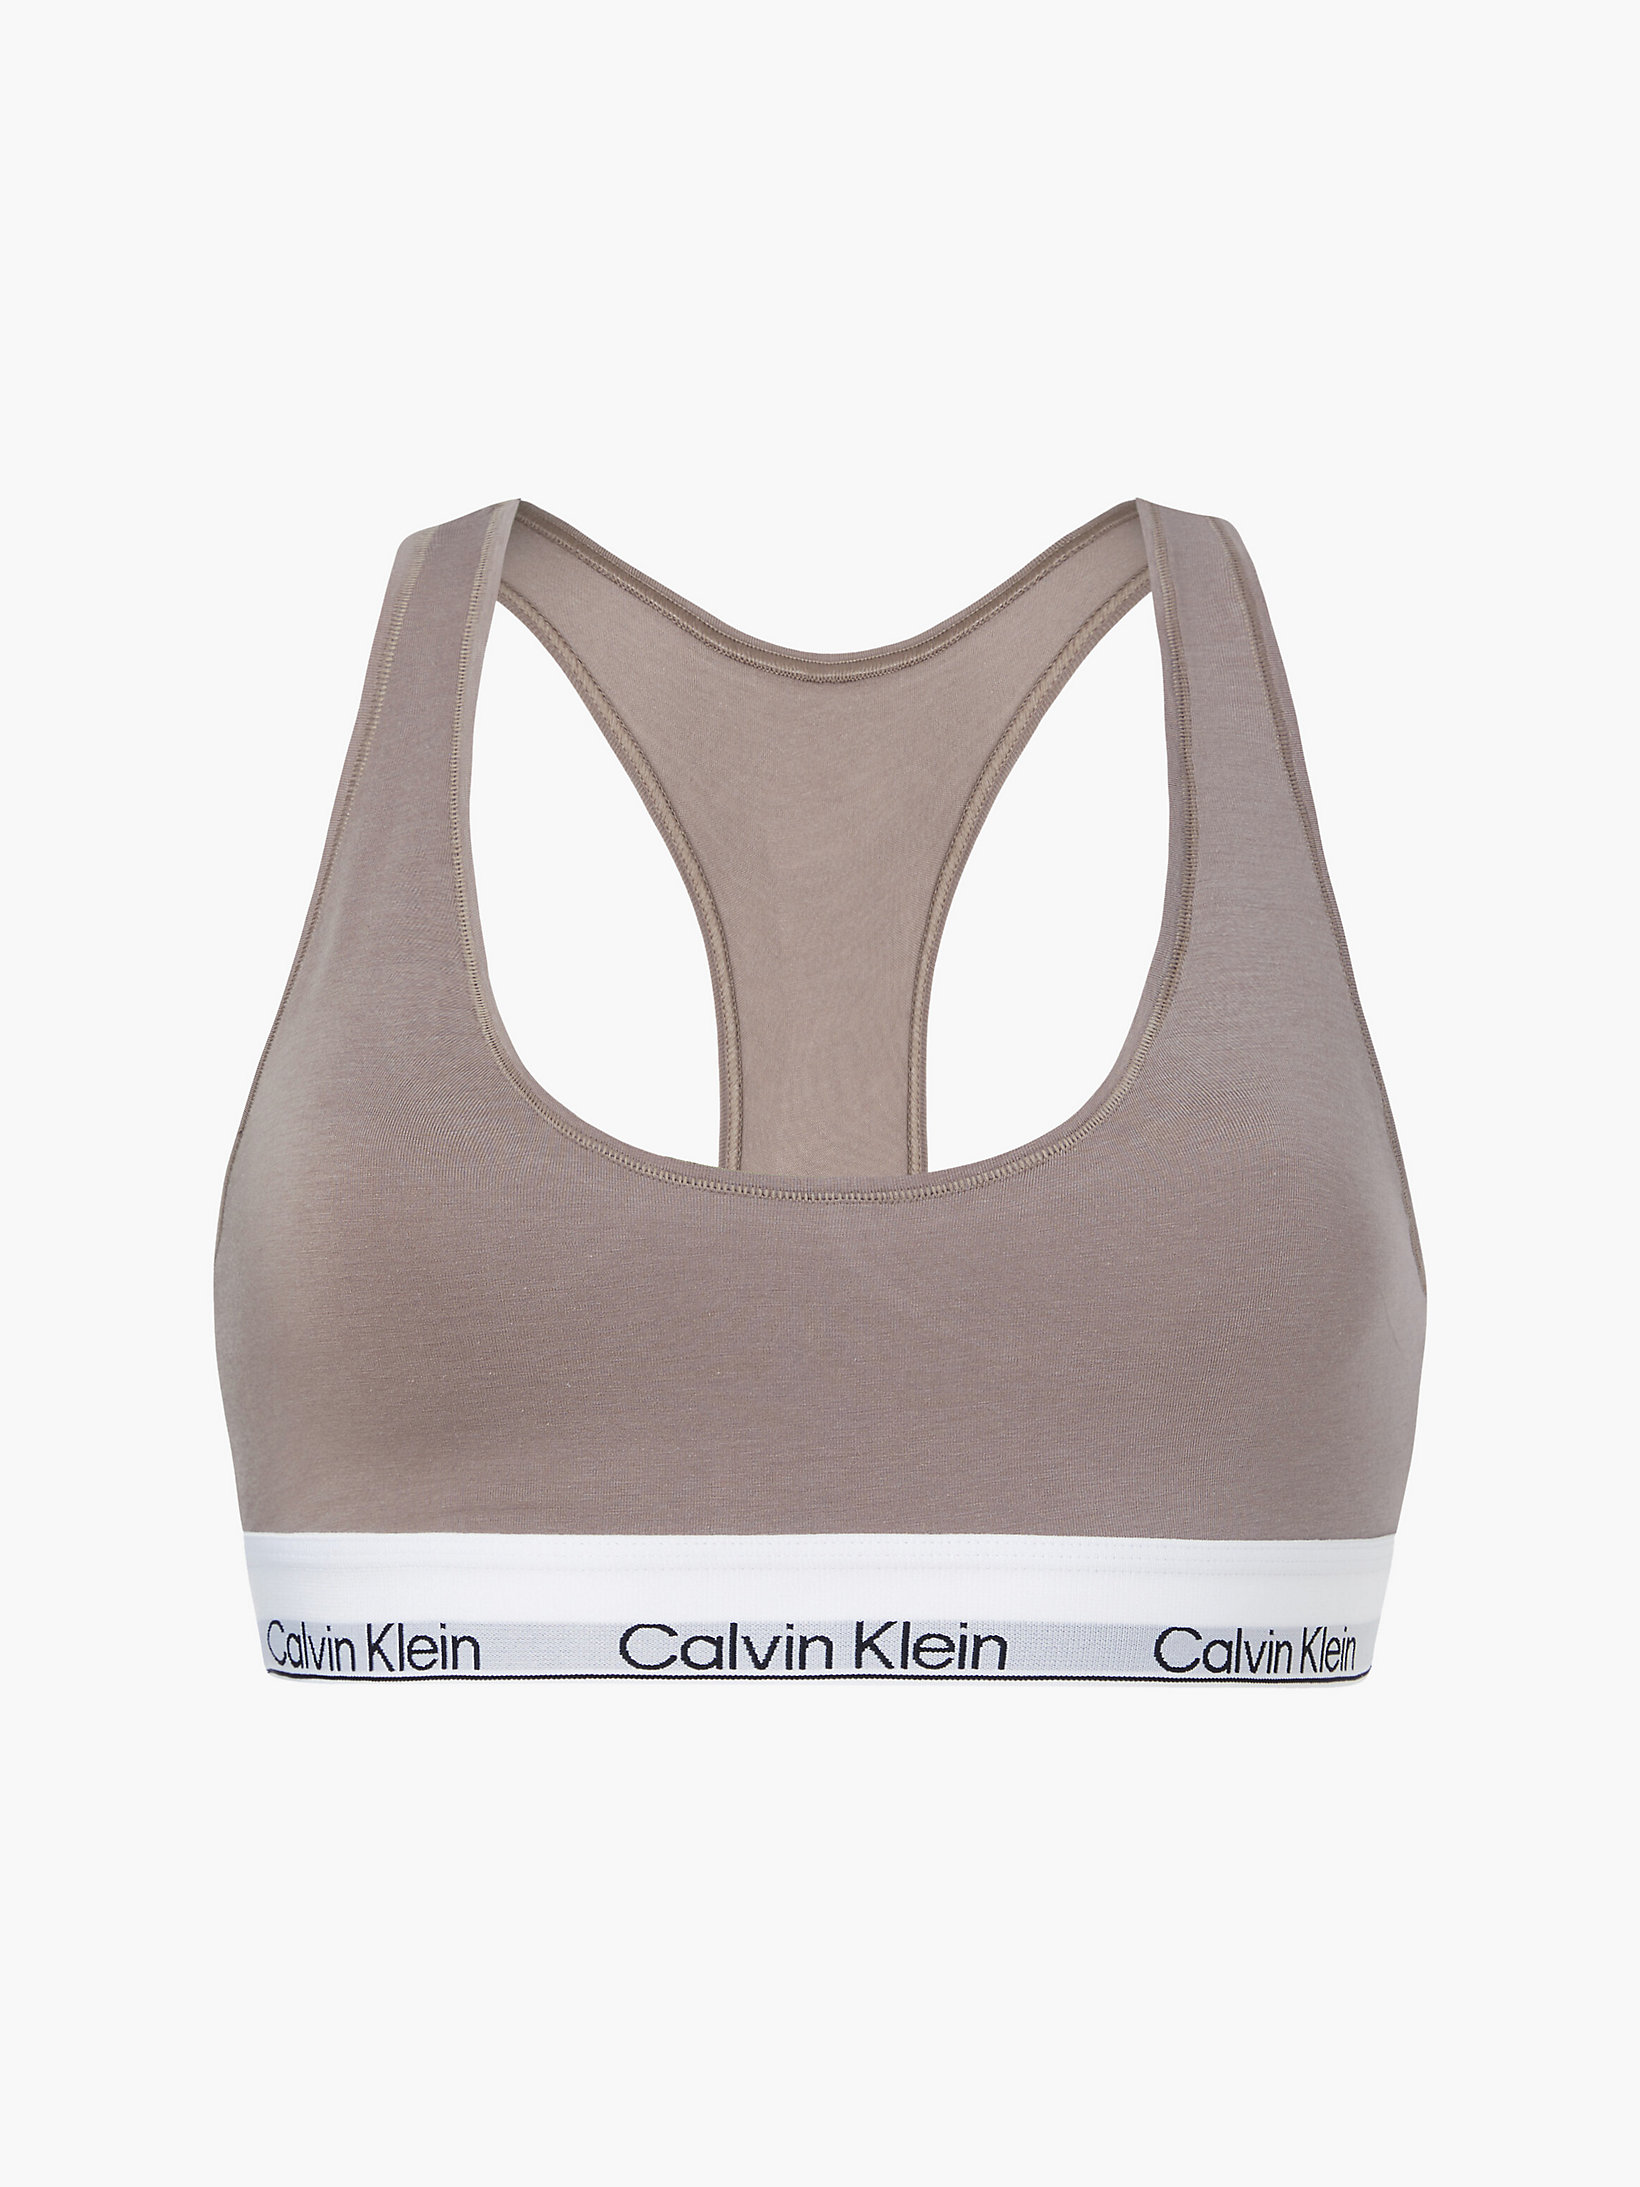 Corpiño - Modern Cotton > Rich Taupe > undefined mujer > Calvin Klein